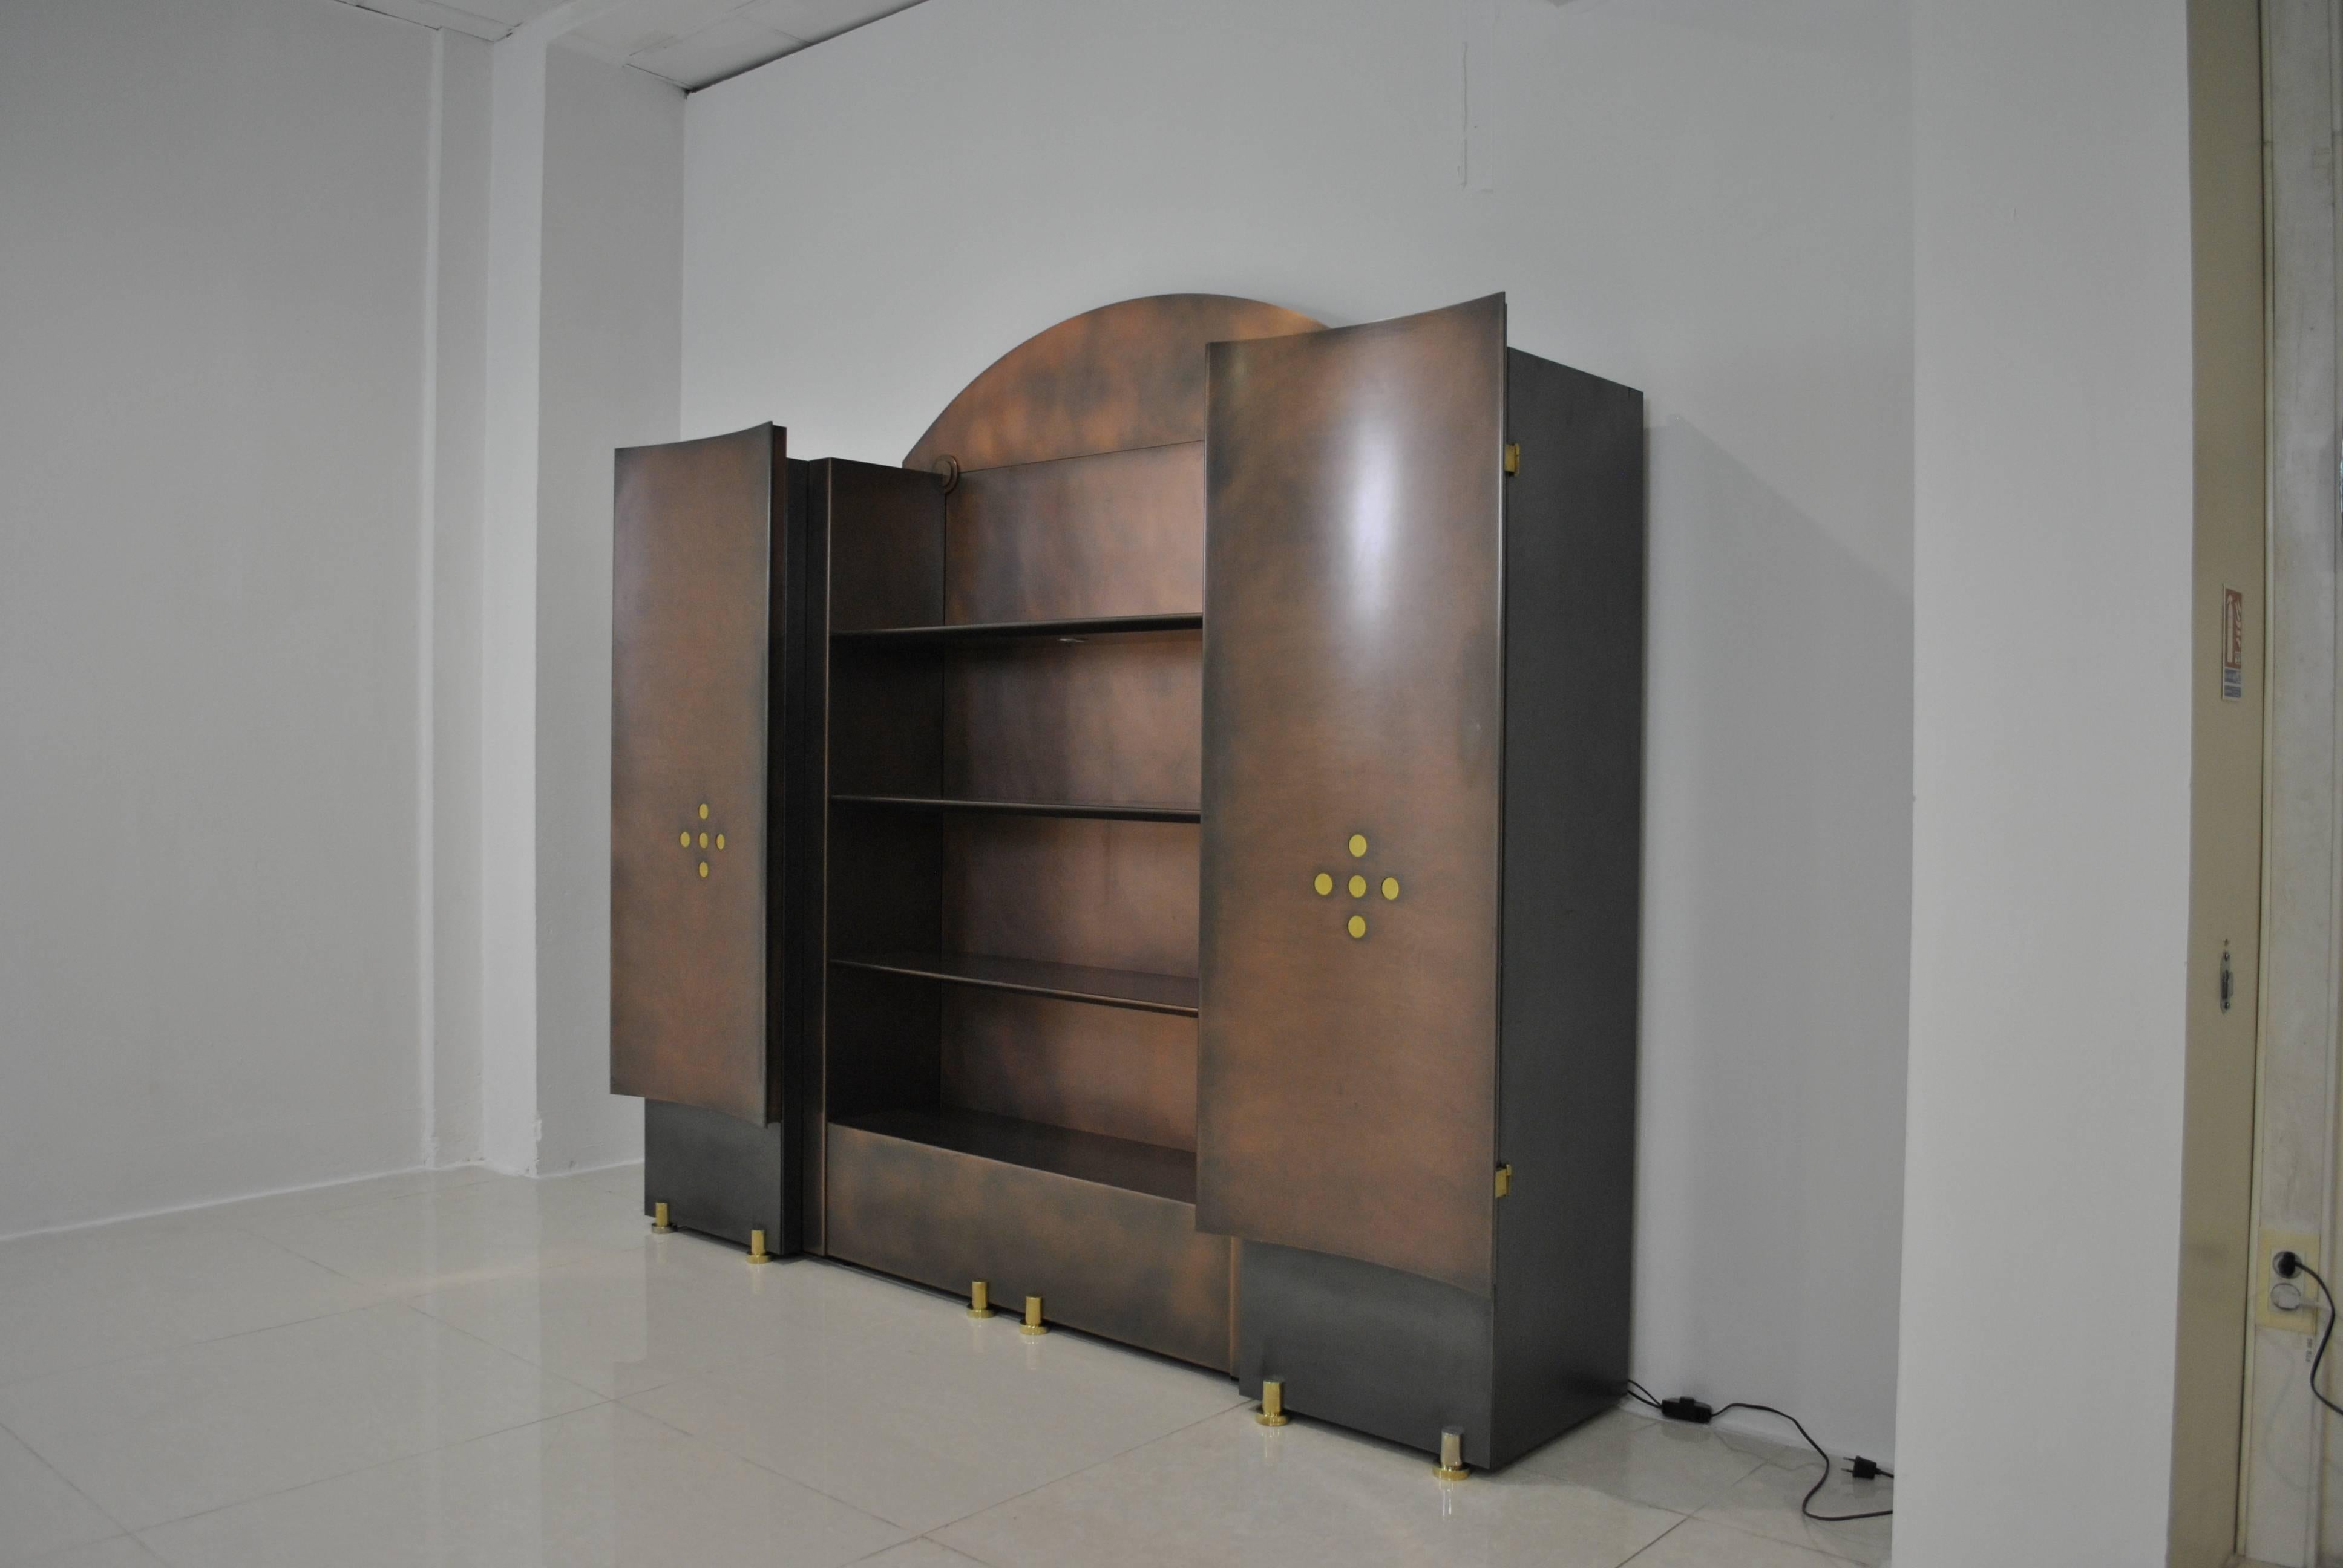 Hollywood Regency Neoclassical Steel and Brass Wall Unit by Belgochrom, Belgium, 1980s For Sale